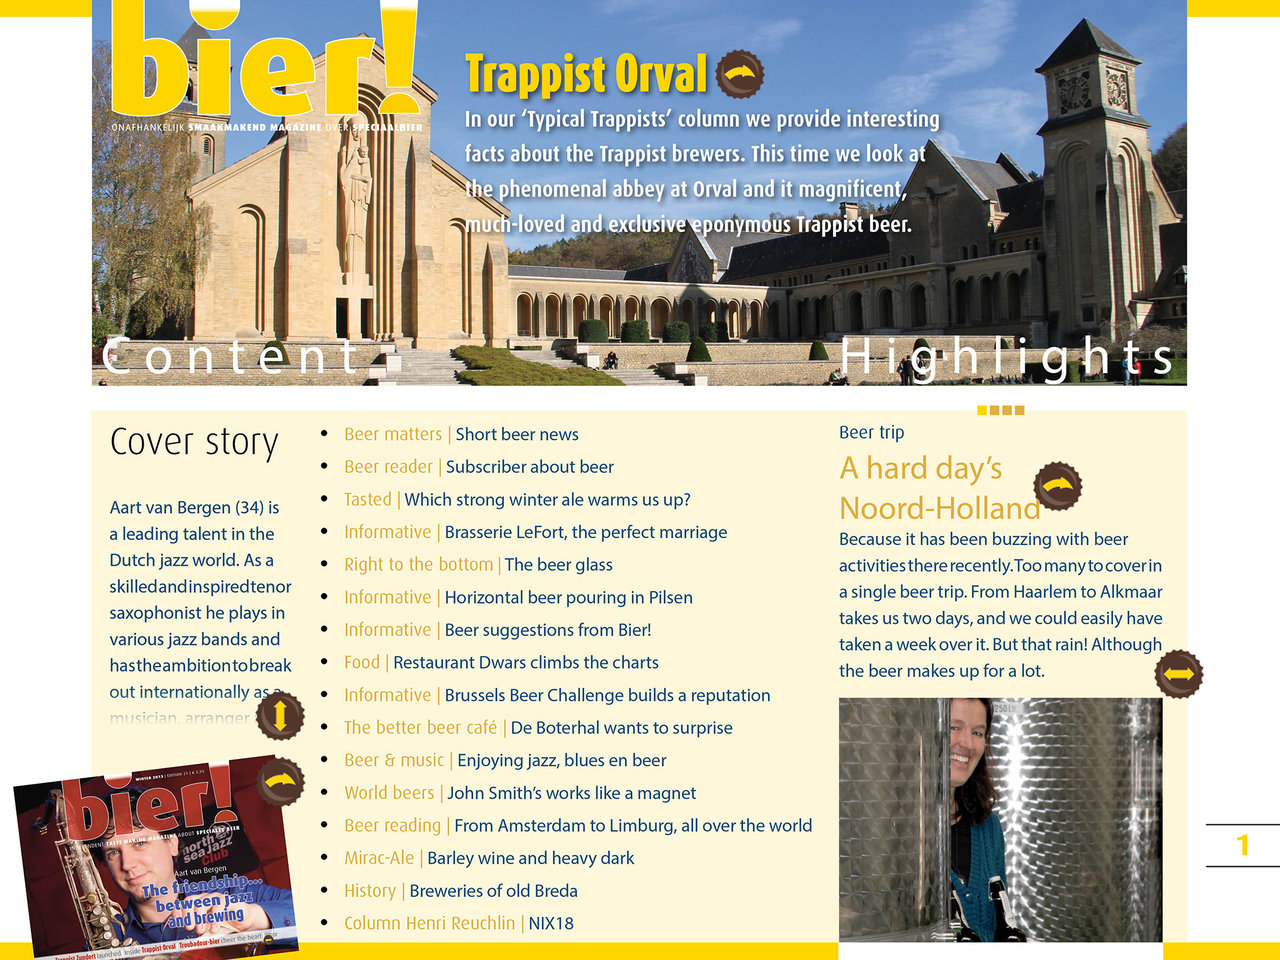 The table of content page of issue 21, Bier! Magazine